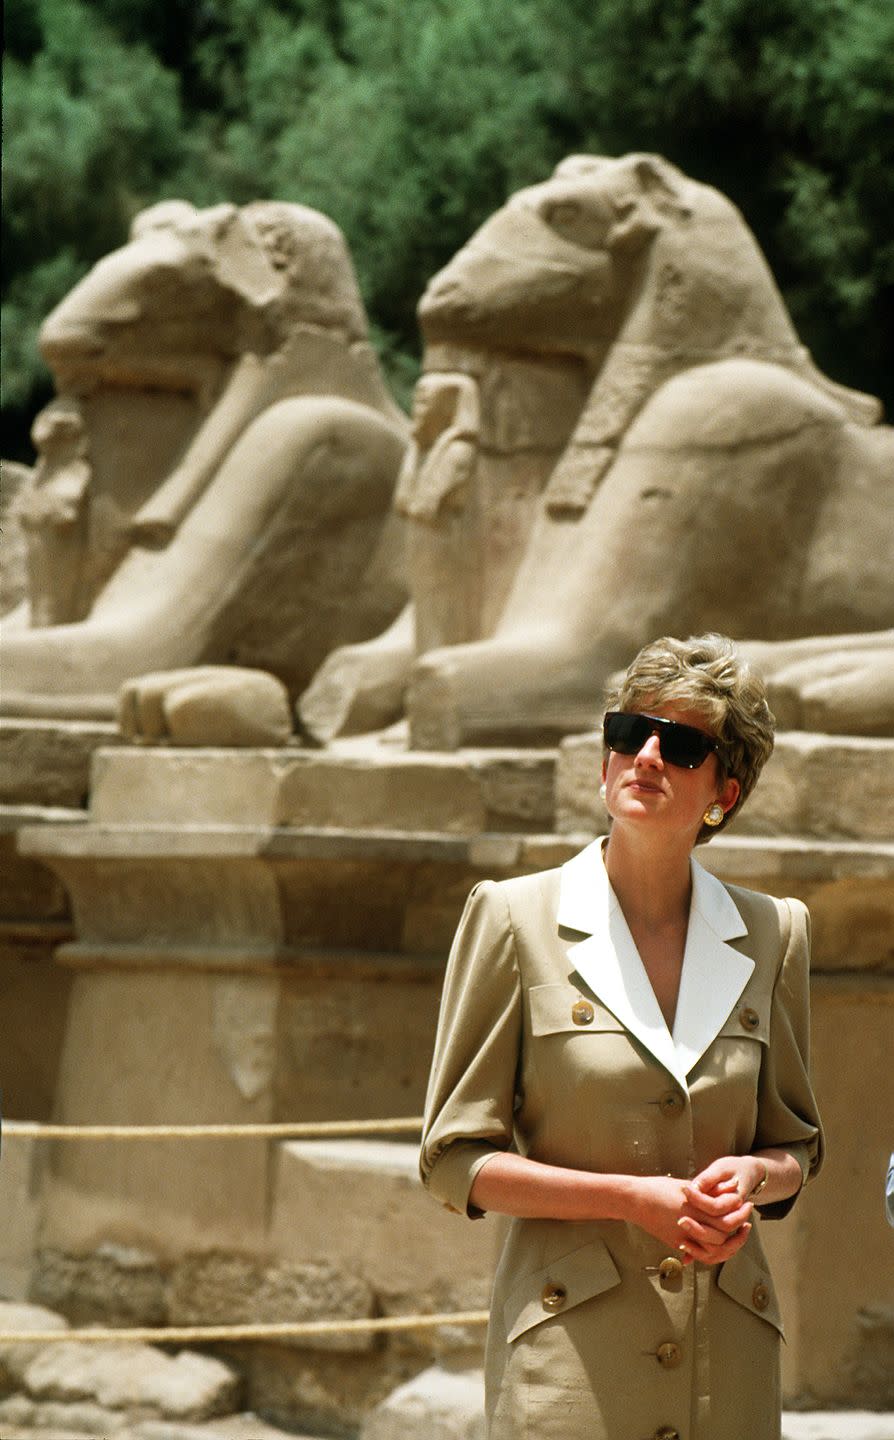 <p>The Princess of Wales wore a tan and white button down dress by Catherine Walker while visiting the Karnak Temple in Luxor, Egypt.</p>